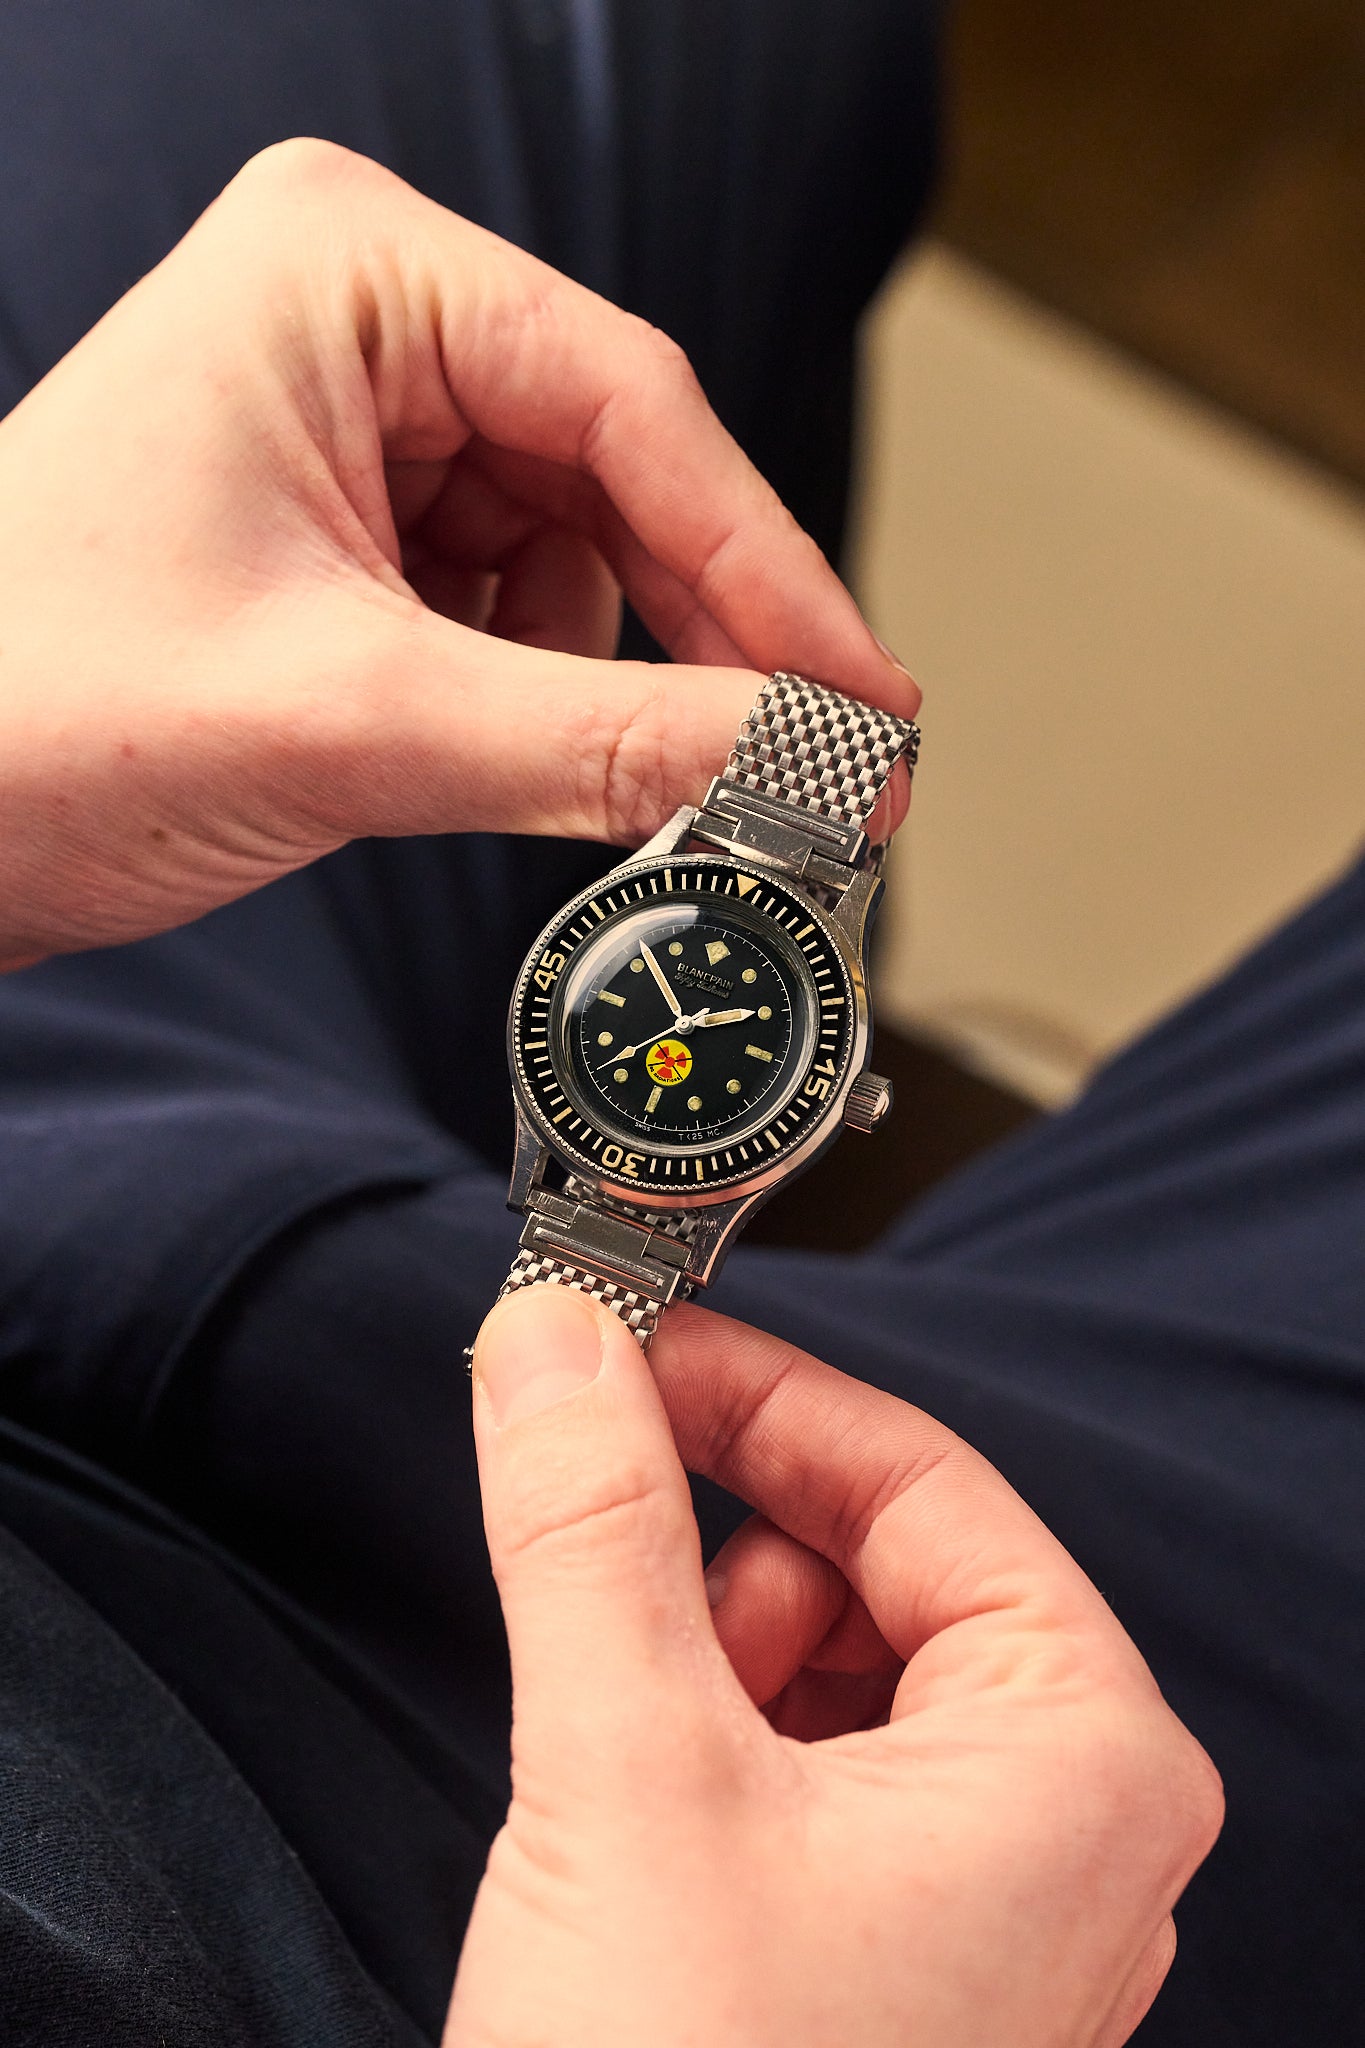 BLANCPAIN FIFTY FATHOMS 'NO RADIATIONS' MILITARY ISSUED